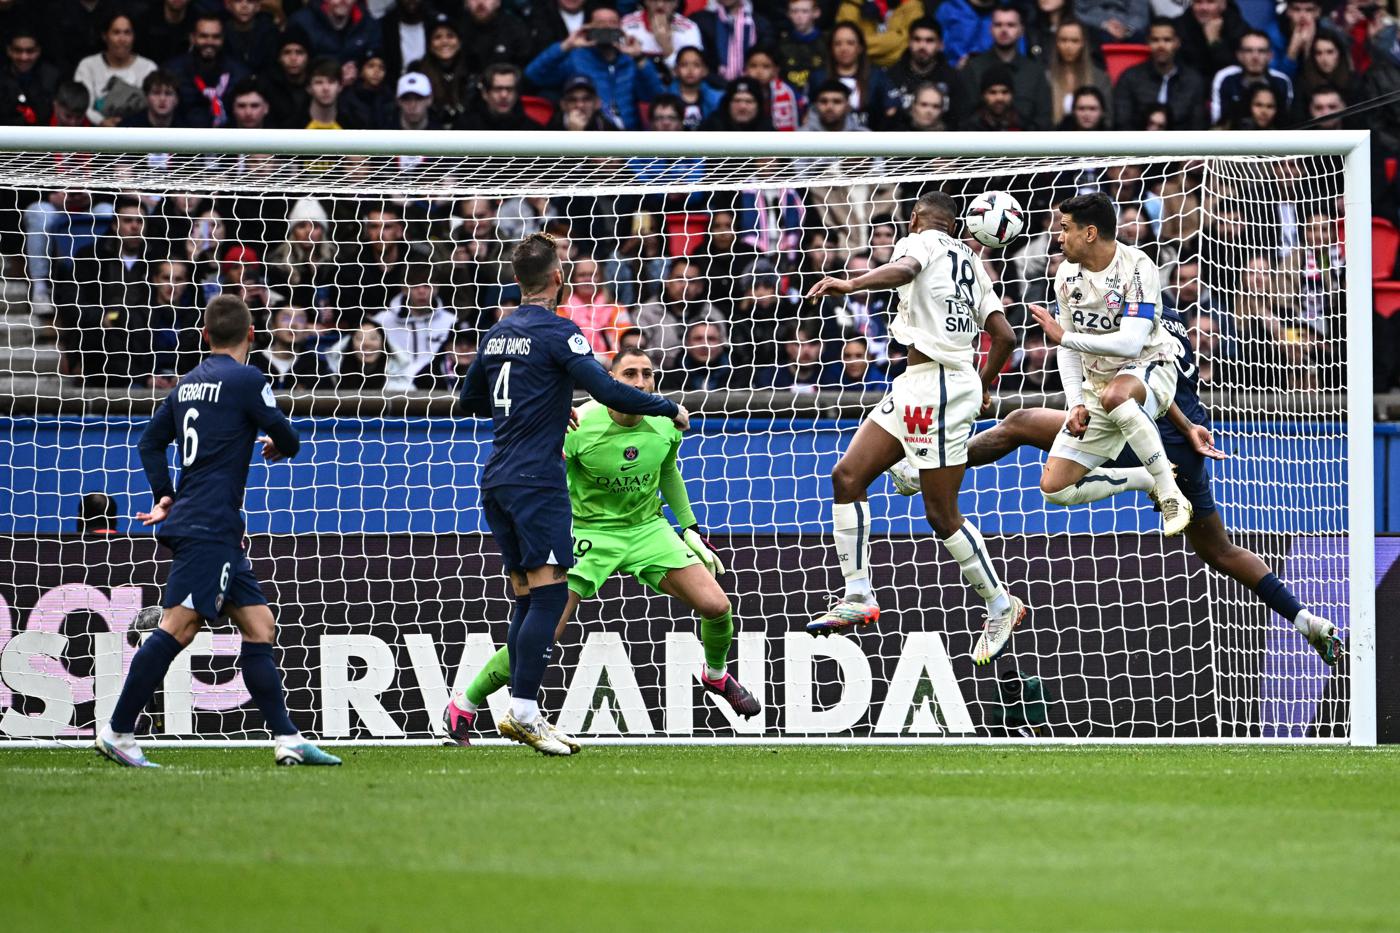 PSG - Lille - 4:3. French Championship, 24th round. Match review, statistics